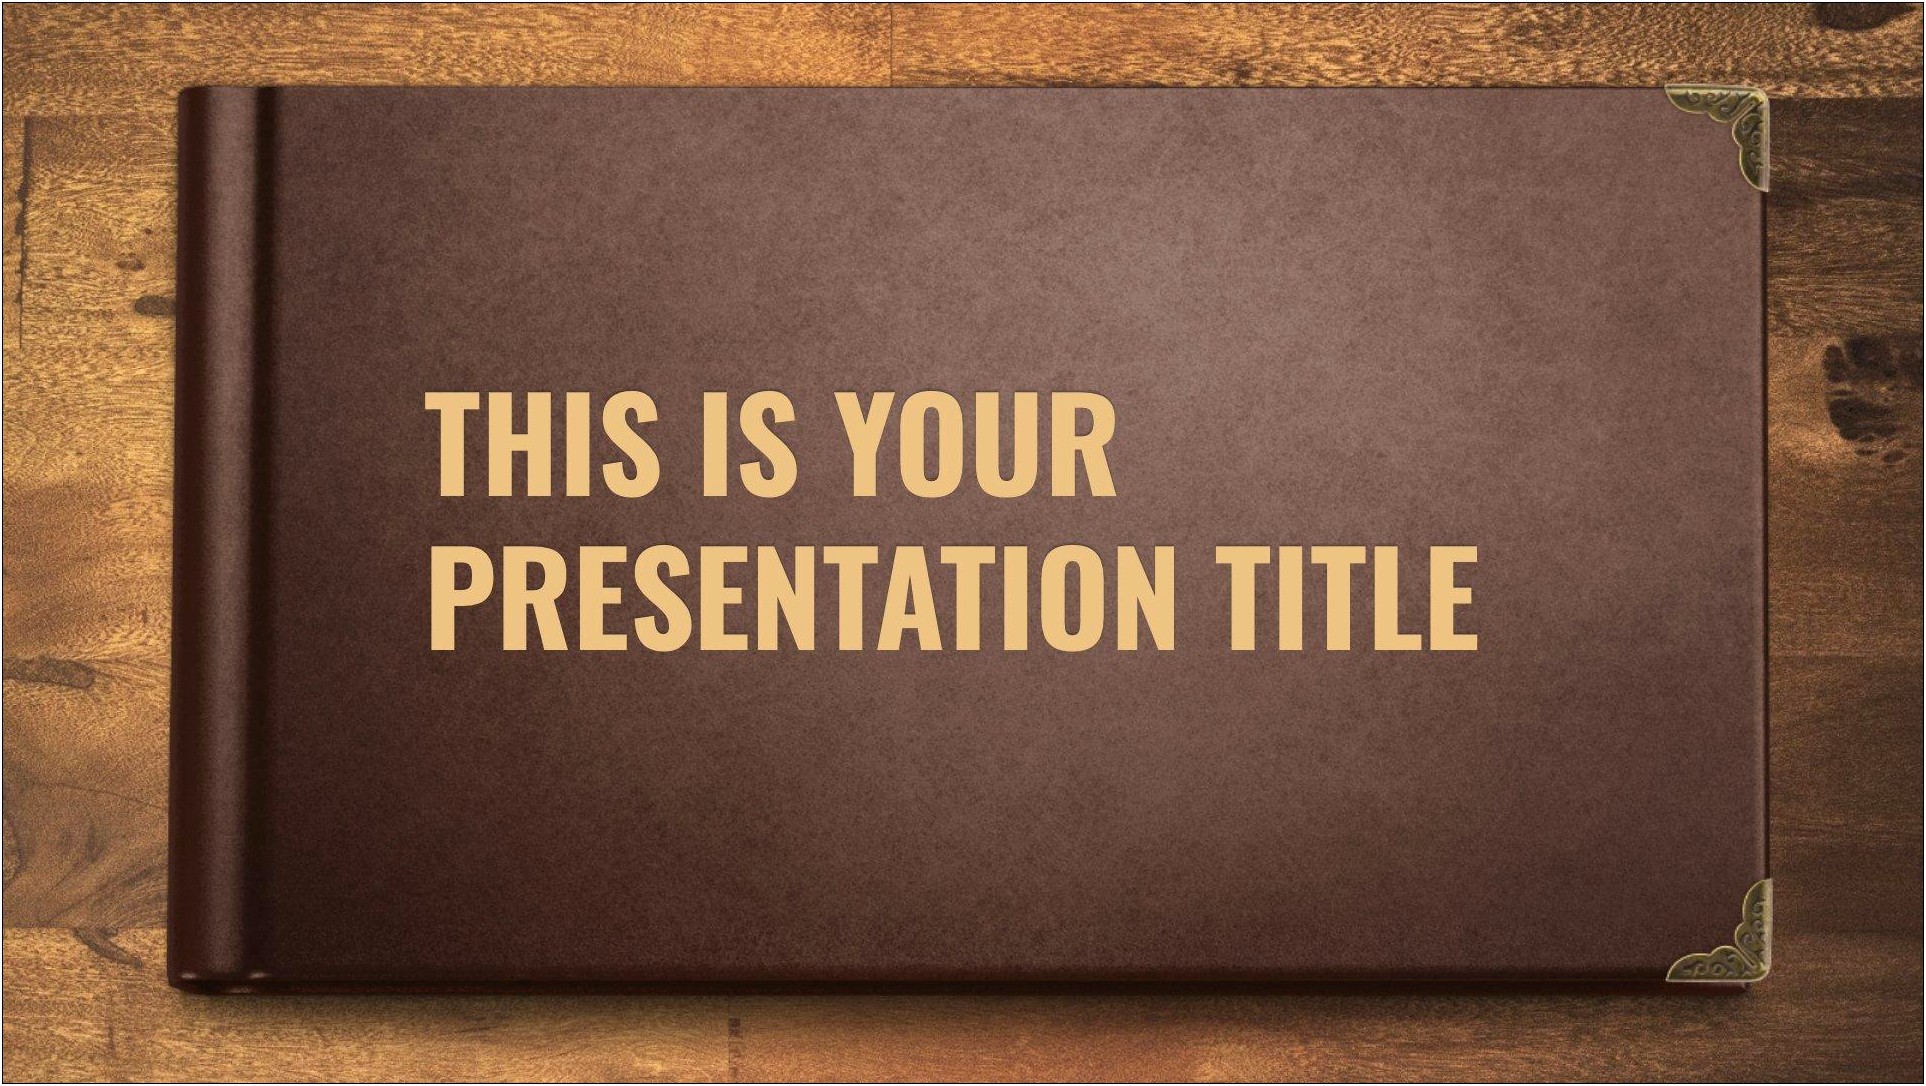 Free Downloadable Powerpoint Templates For A Book Review